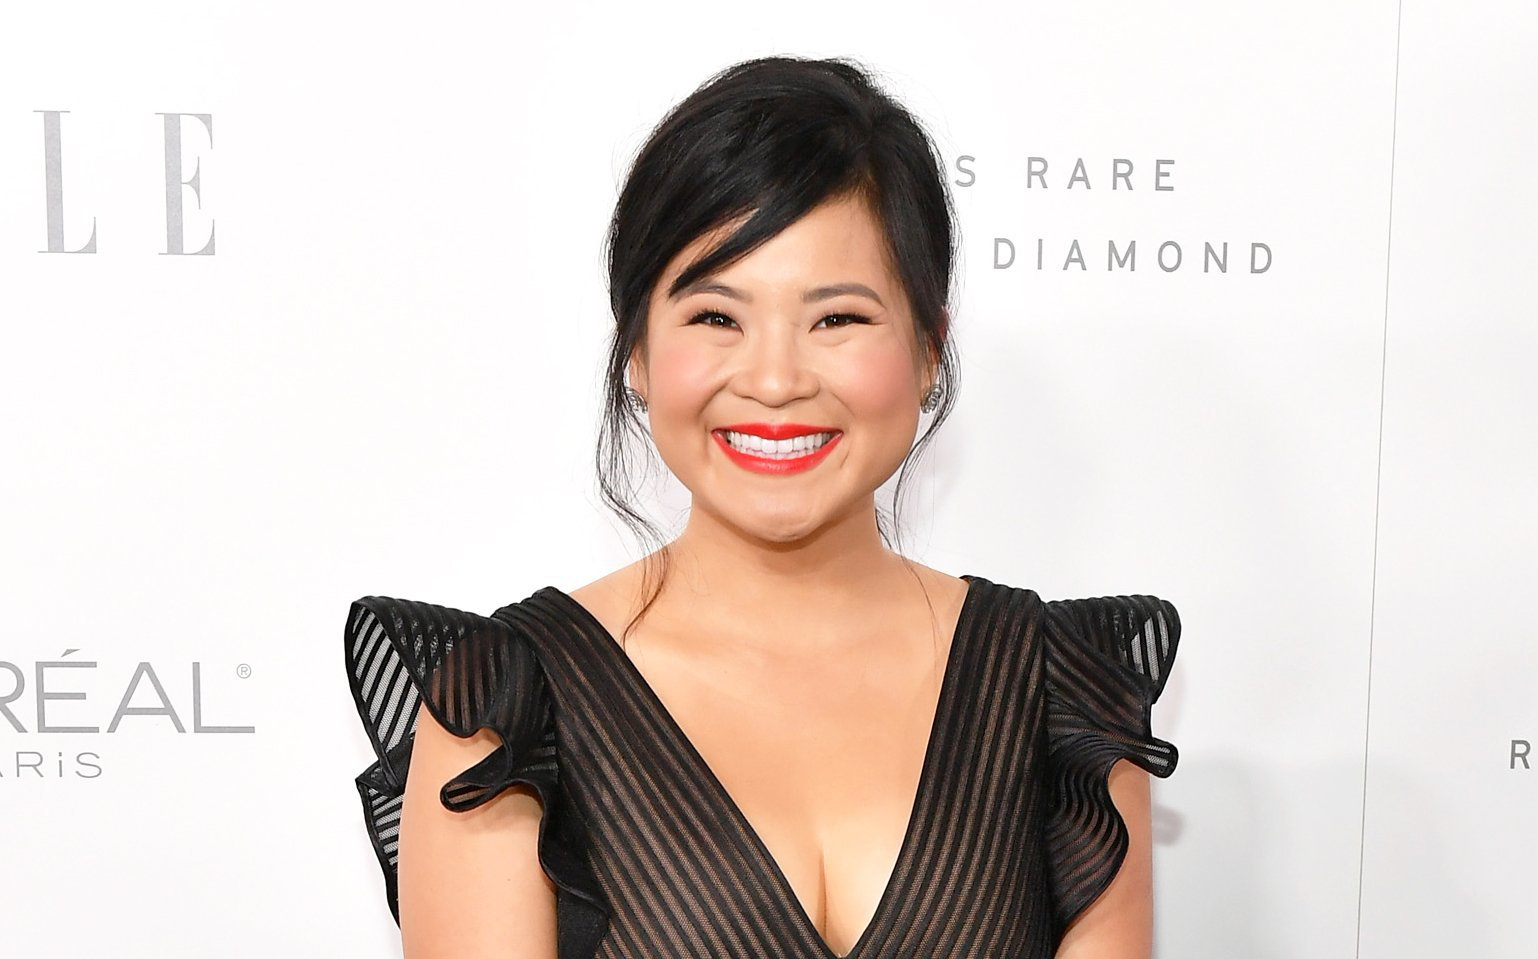 ‘Star Wars’ star Kelly Marie Tran used her salary to pay off student loans